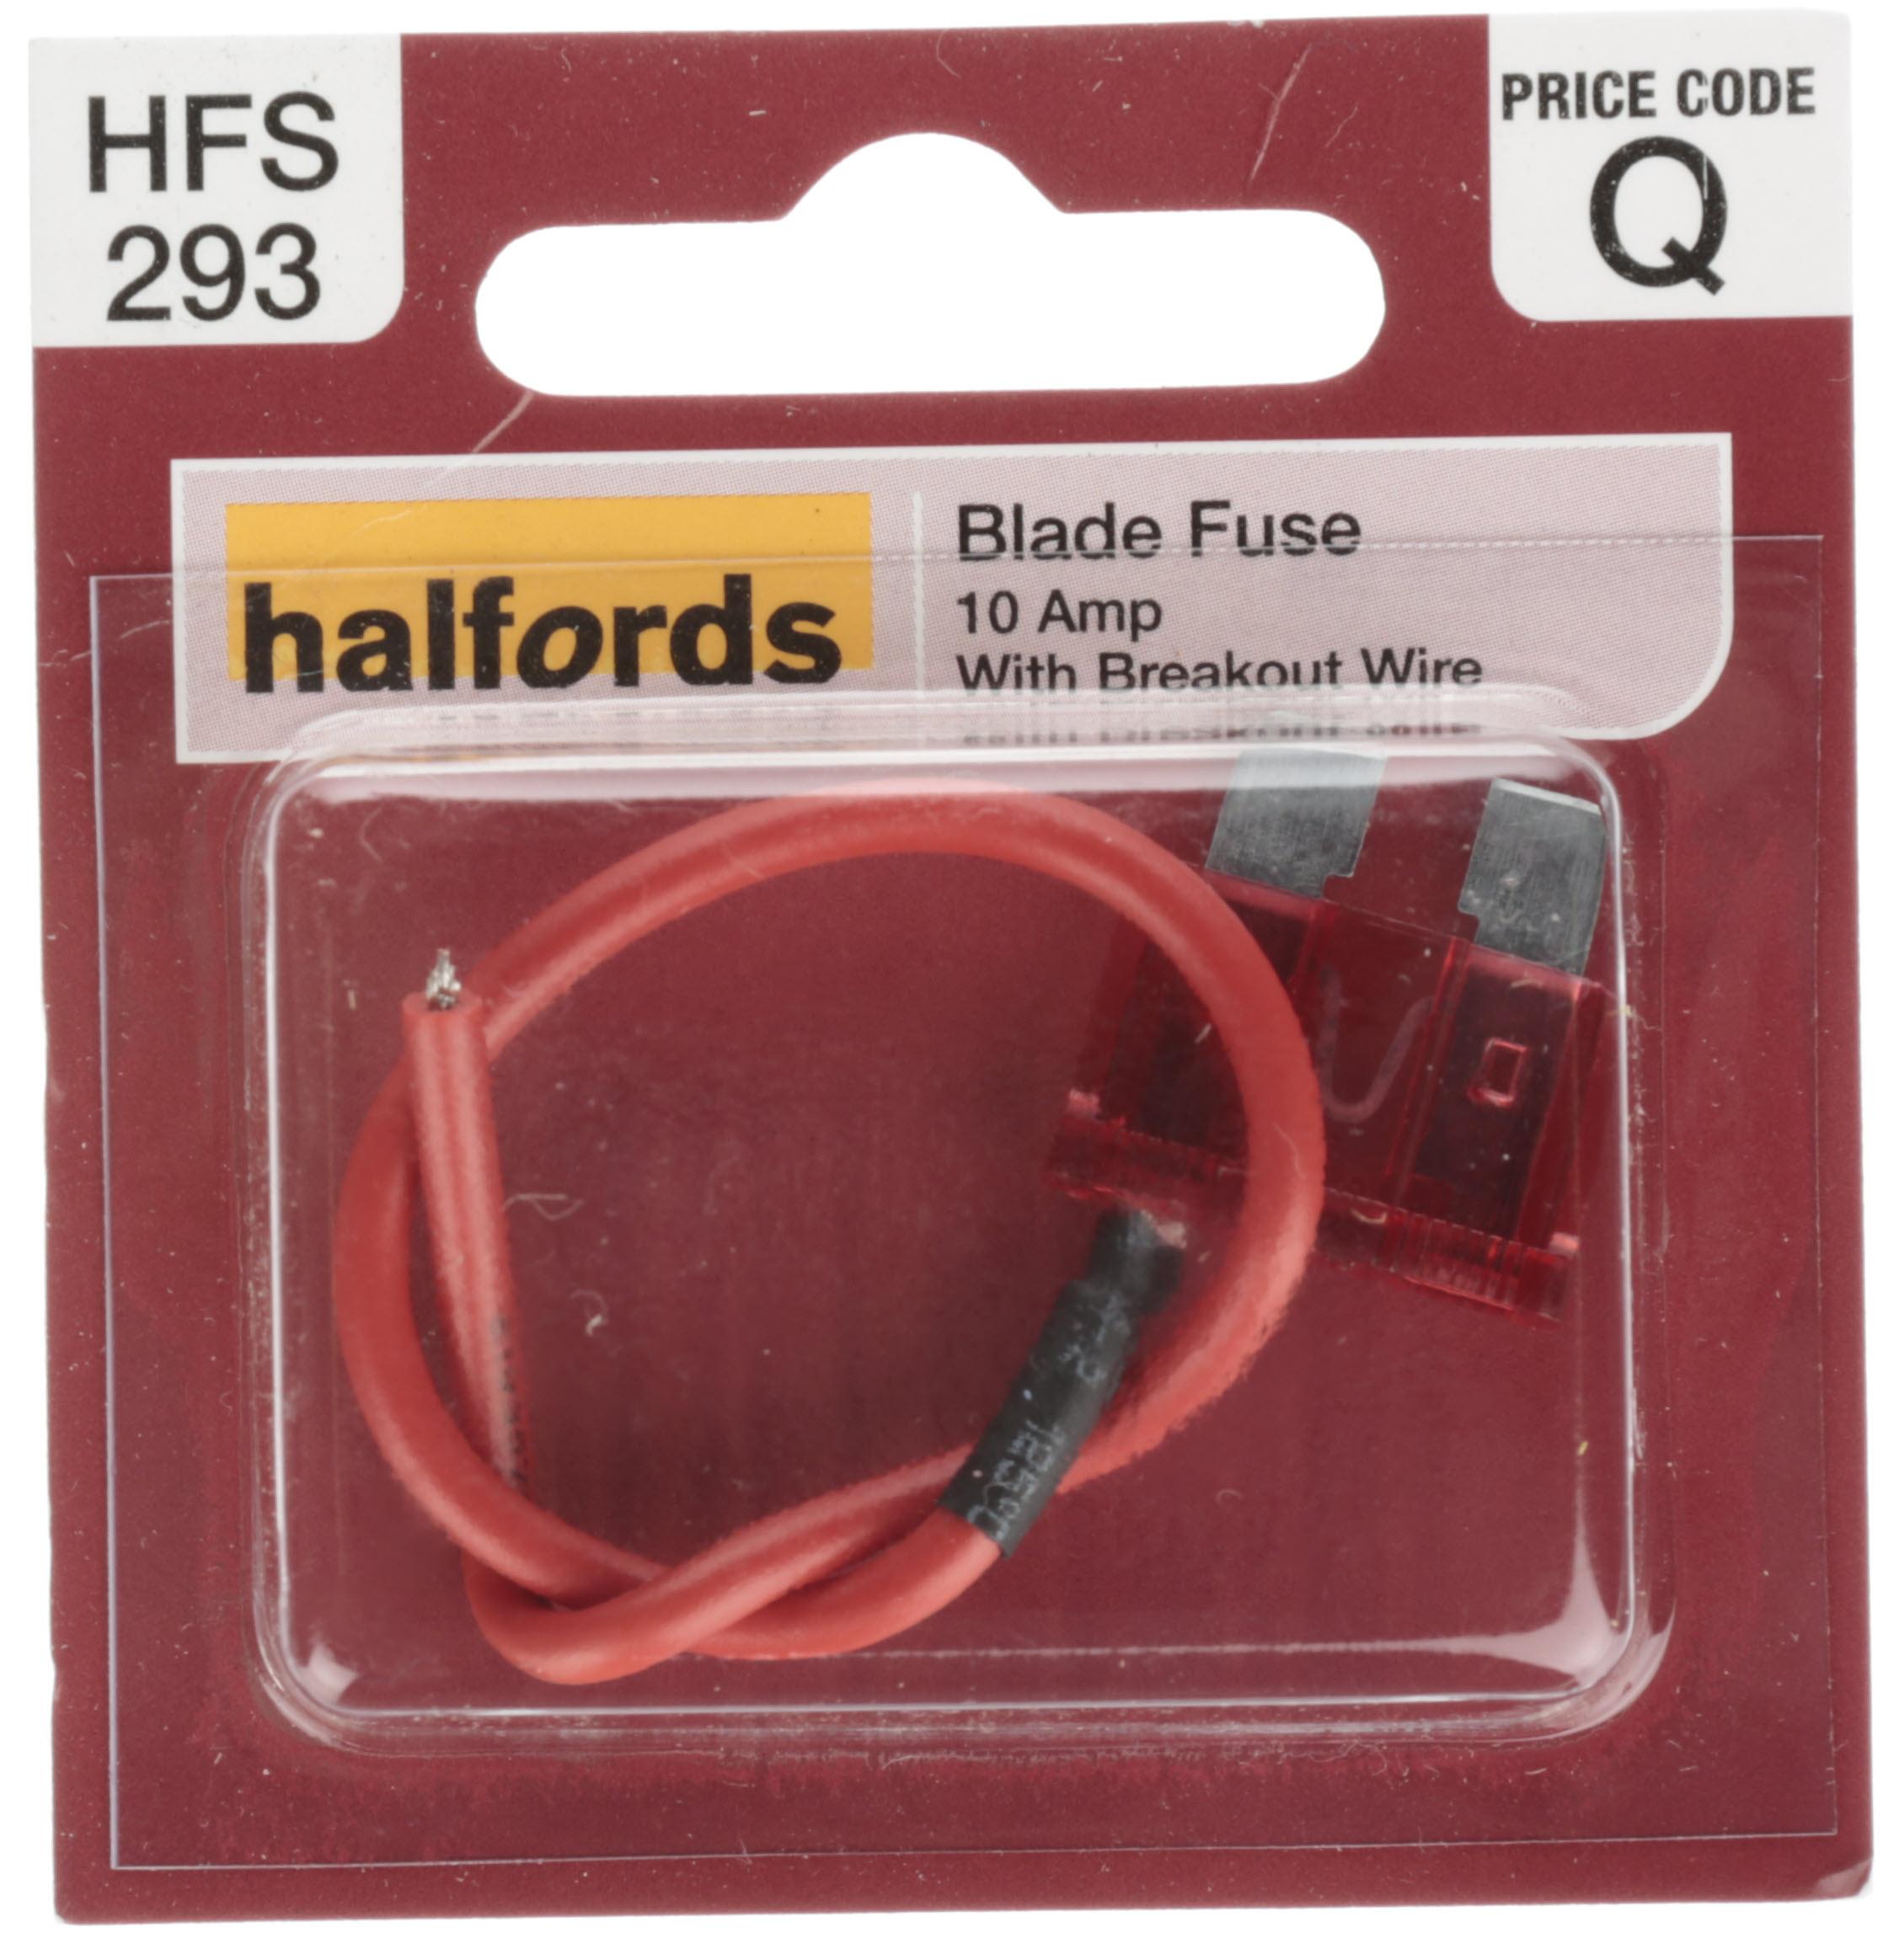 Halfords Blade Fuse + Breakout Wire 10 Amp (Hfs293)